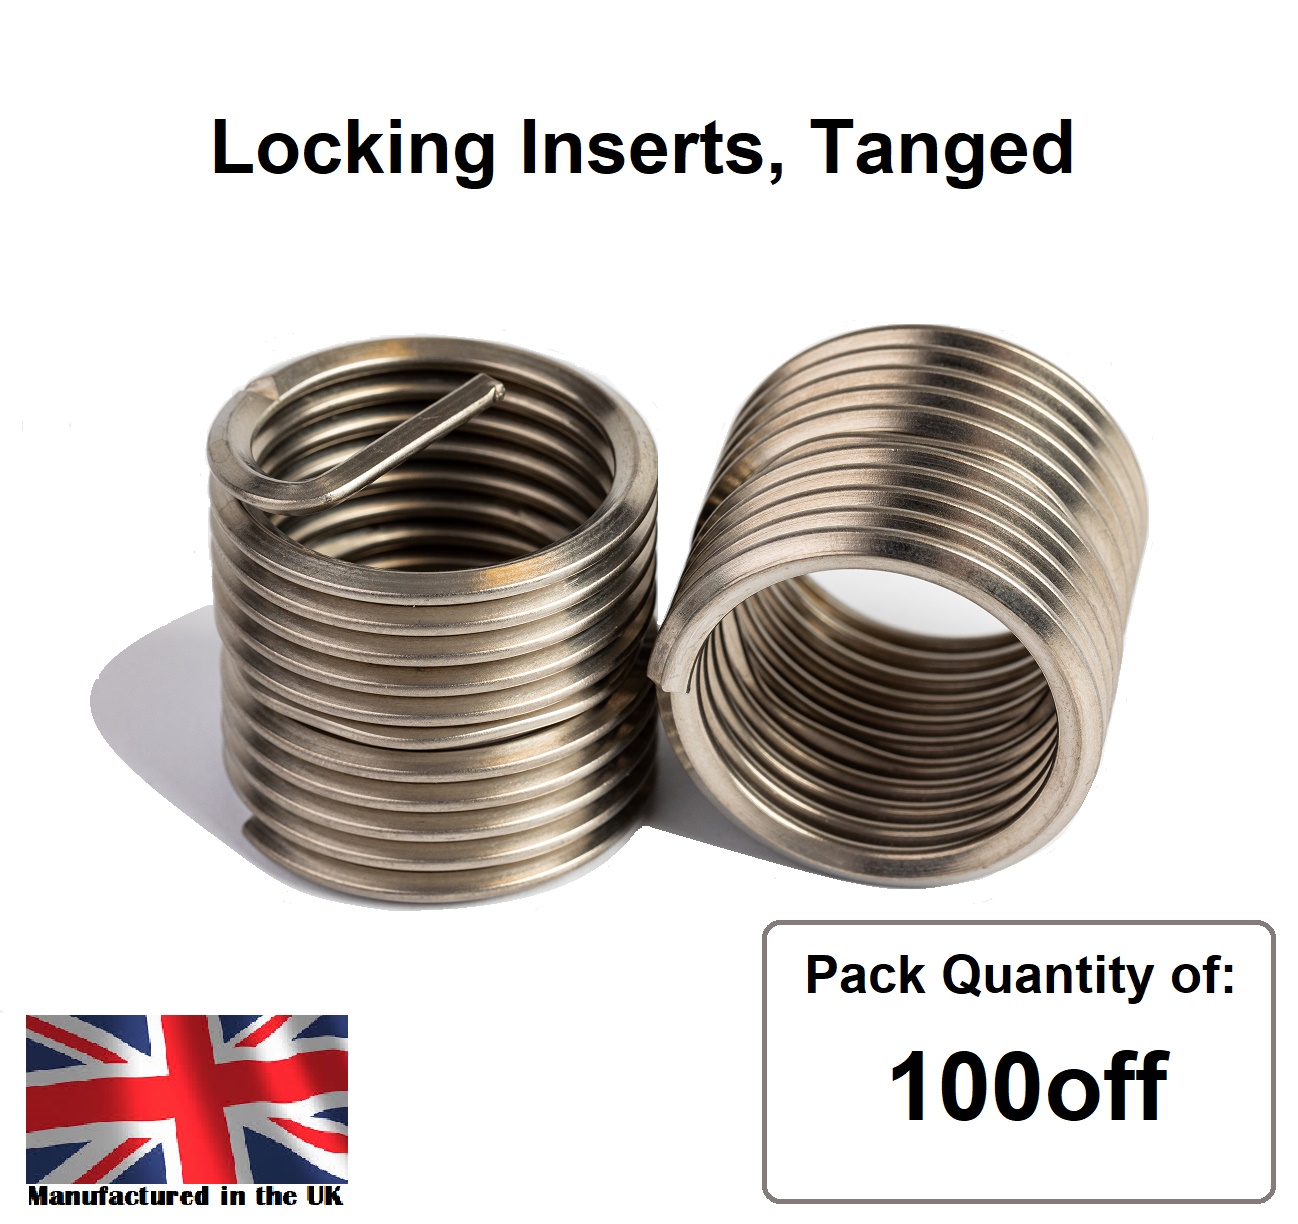 M5 x 0.8 x 1.5D Metric Coarse, LOCKING, Tanged, Wire Thread Repair Insert,  304/A2 Stainless (Pack 100)